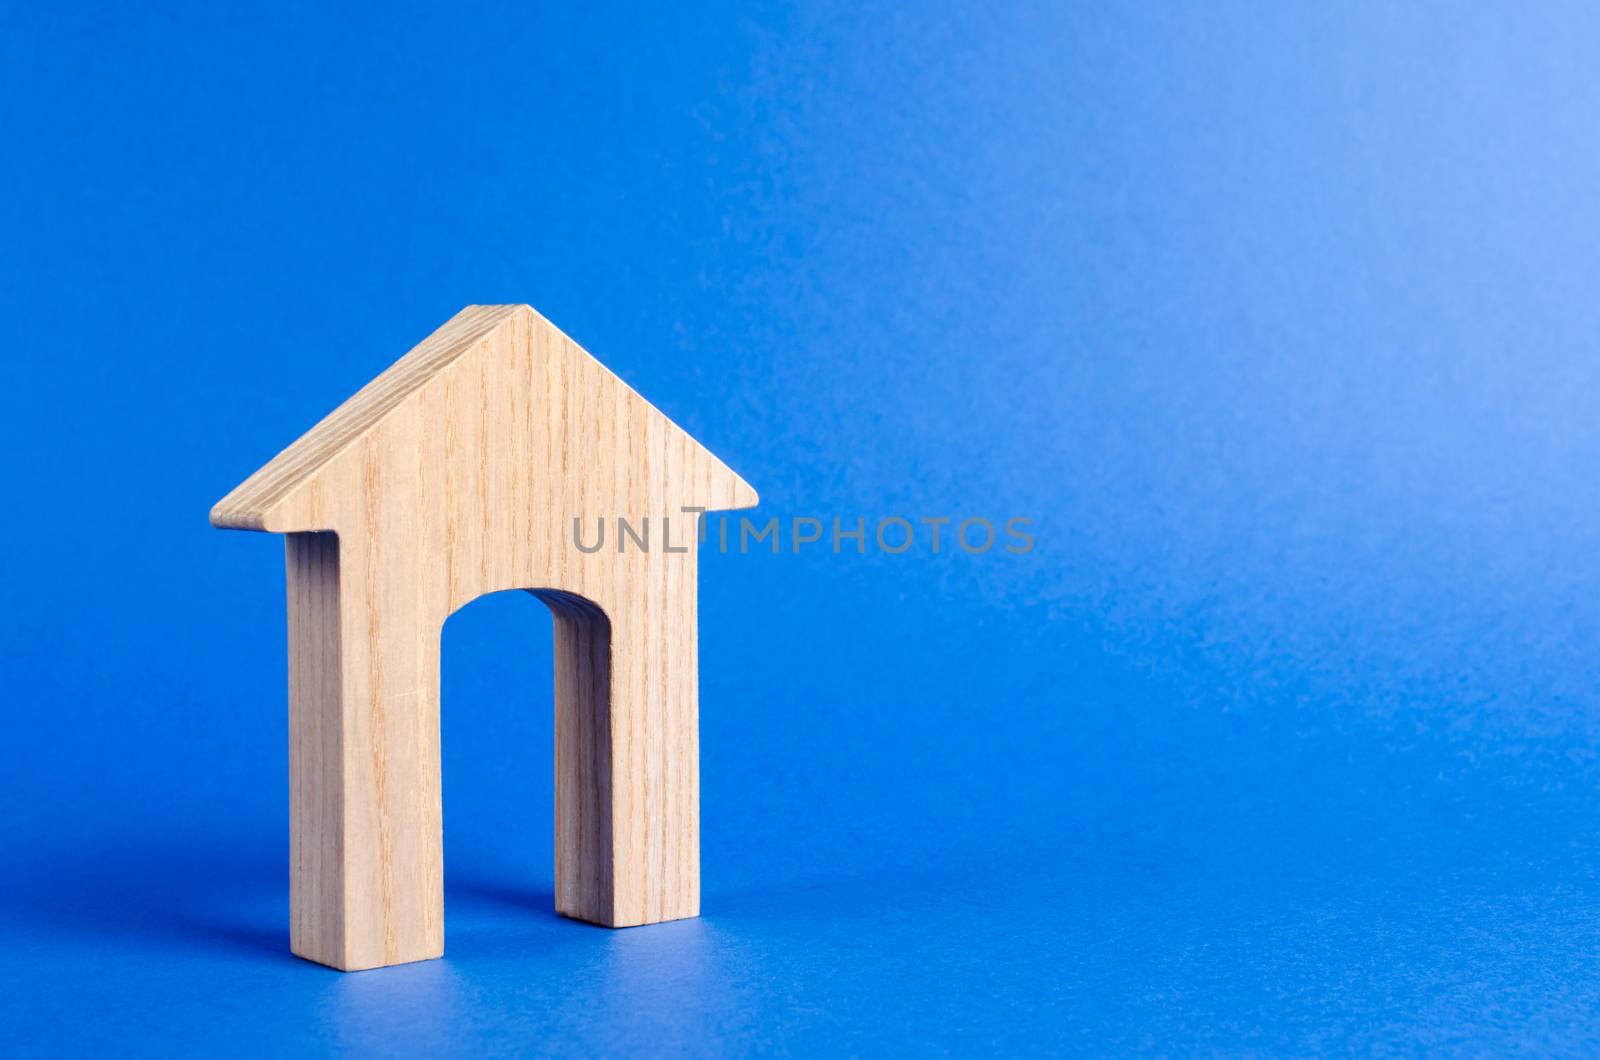 Wooden figure of a house with a large doorway on blue background. concept of buying and selling real estate, rent, investment. Home, Affordable housing, residential building. Construction buildings. by iLixe48